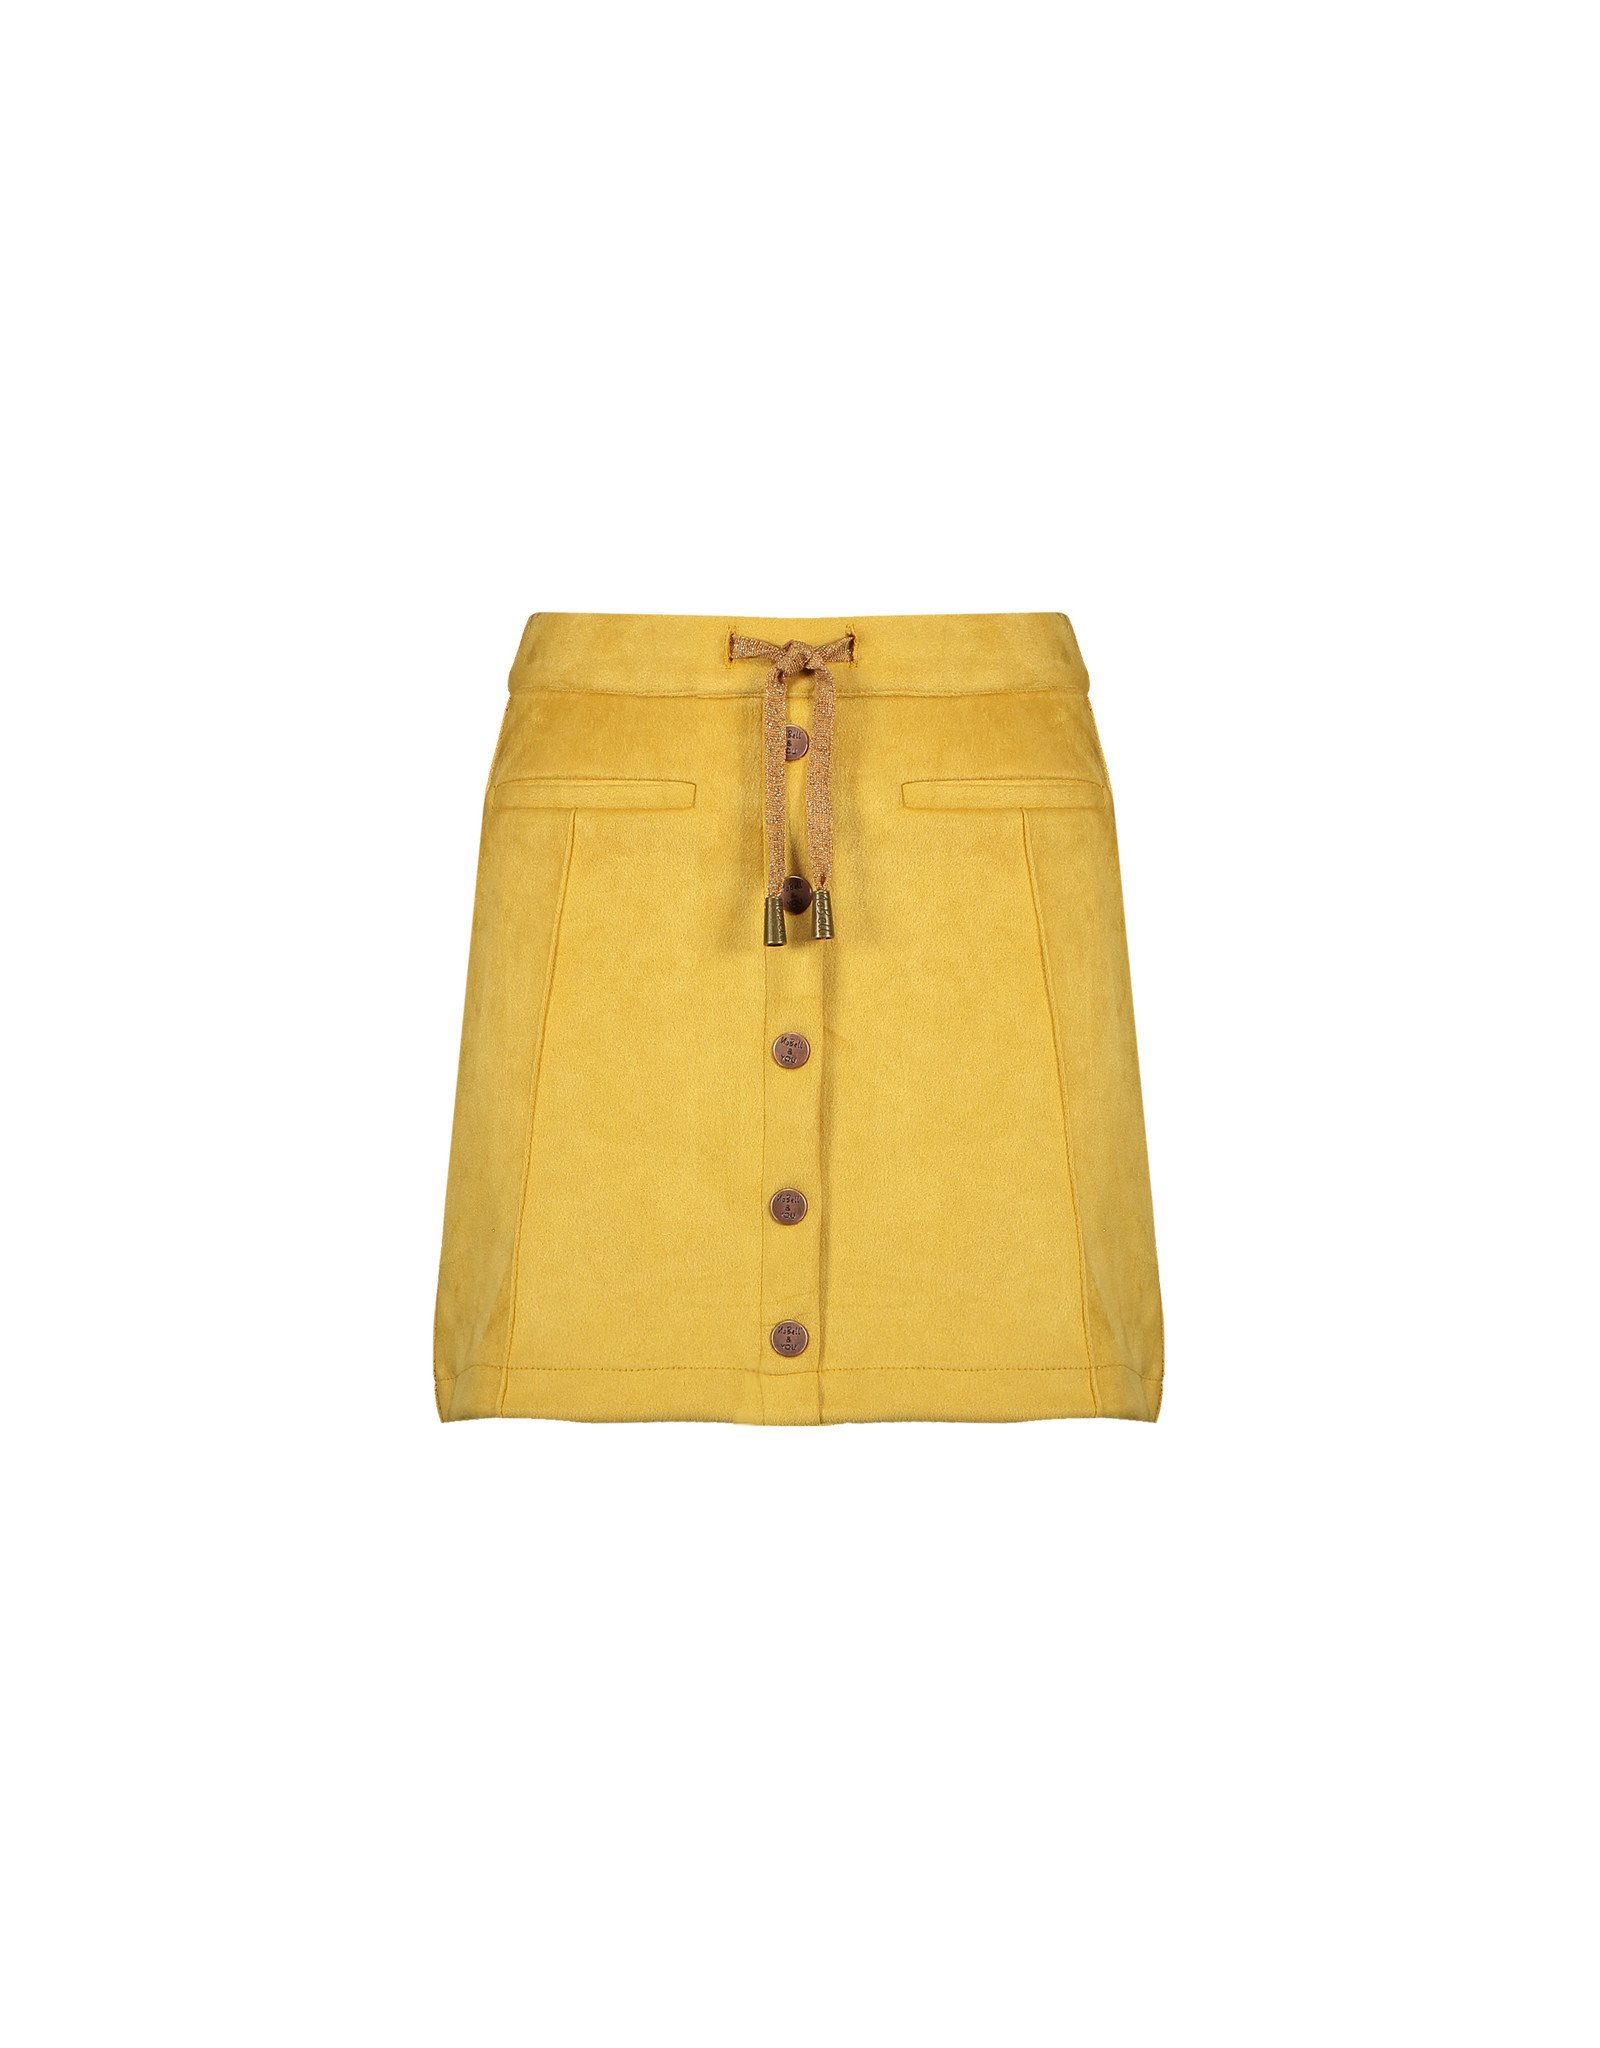 NoBell NoBell NishaB Soft Suede short A-line skirt YELLOW GOLD